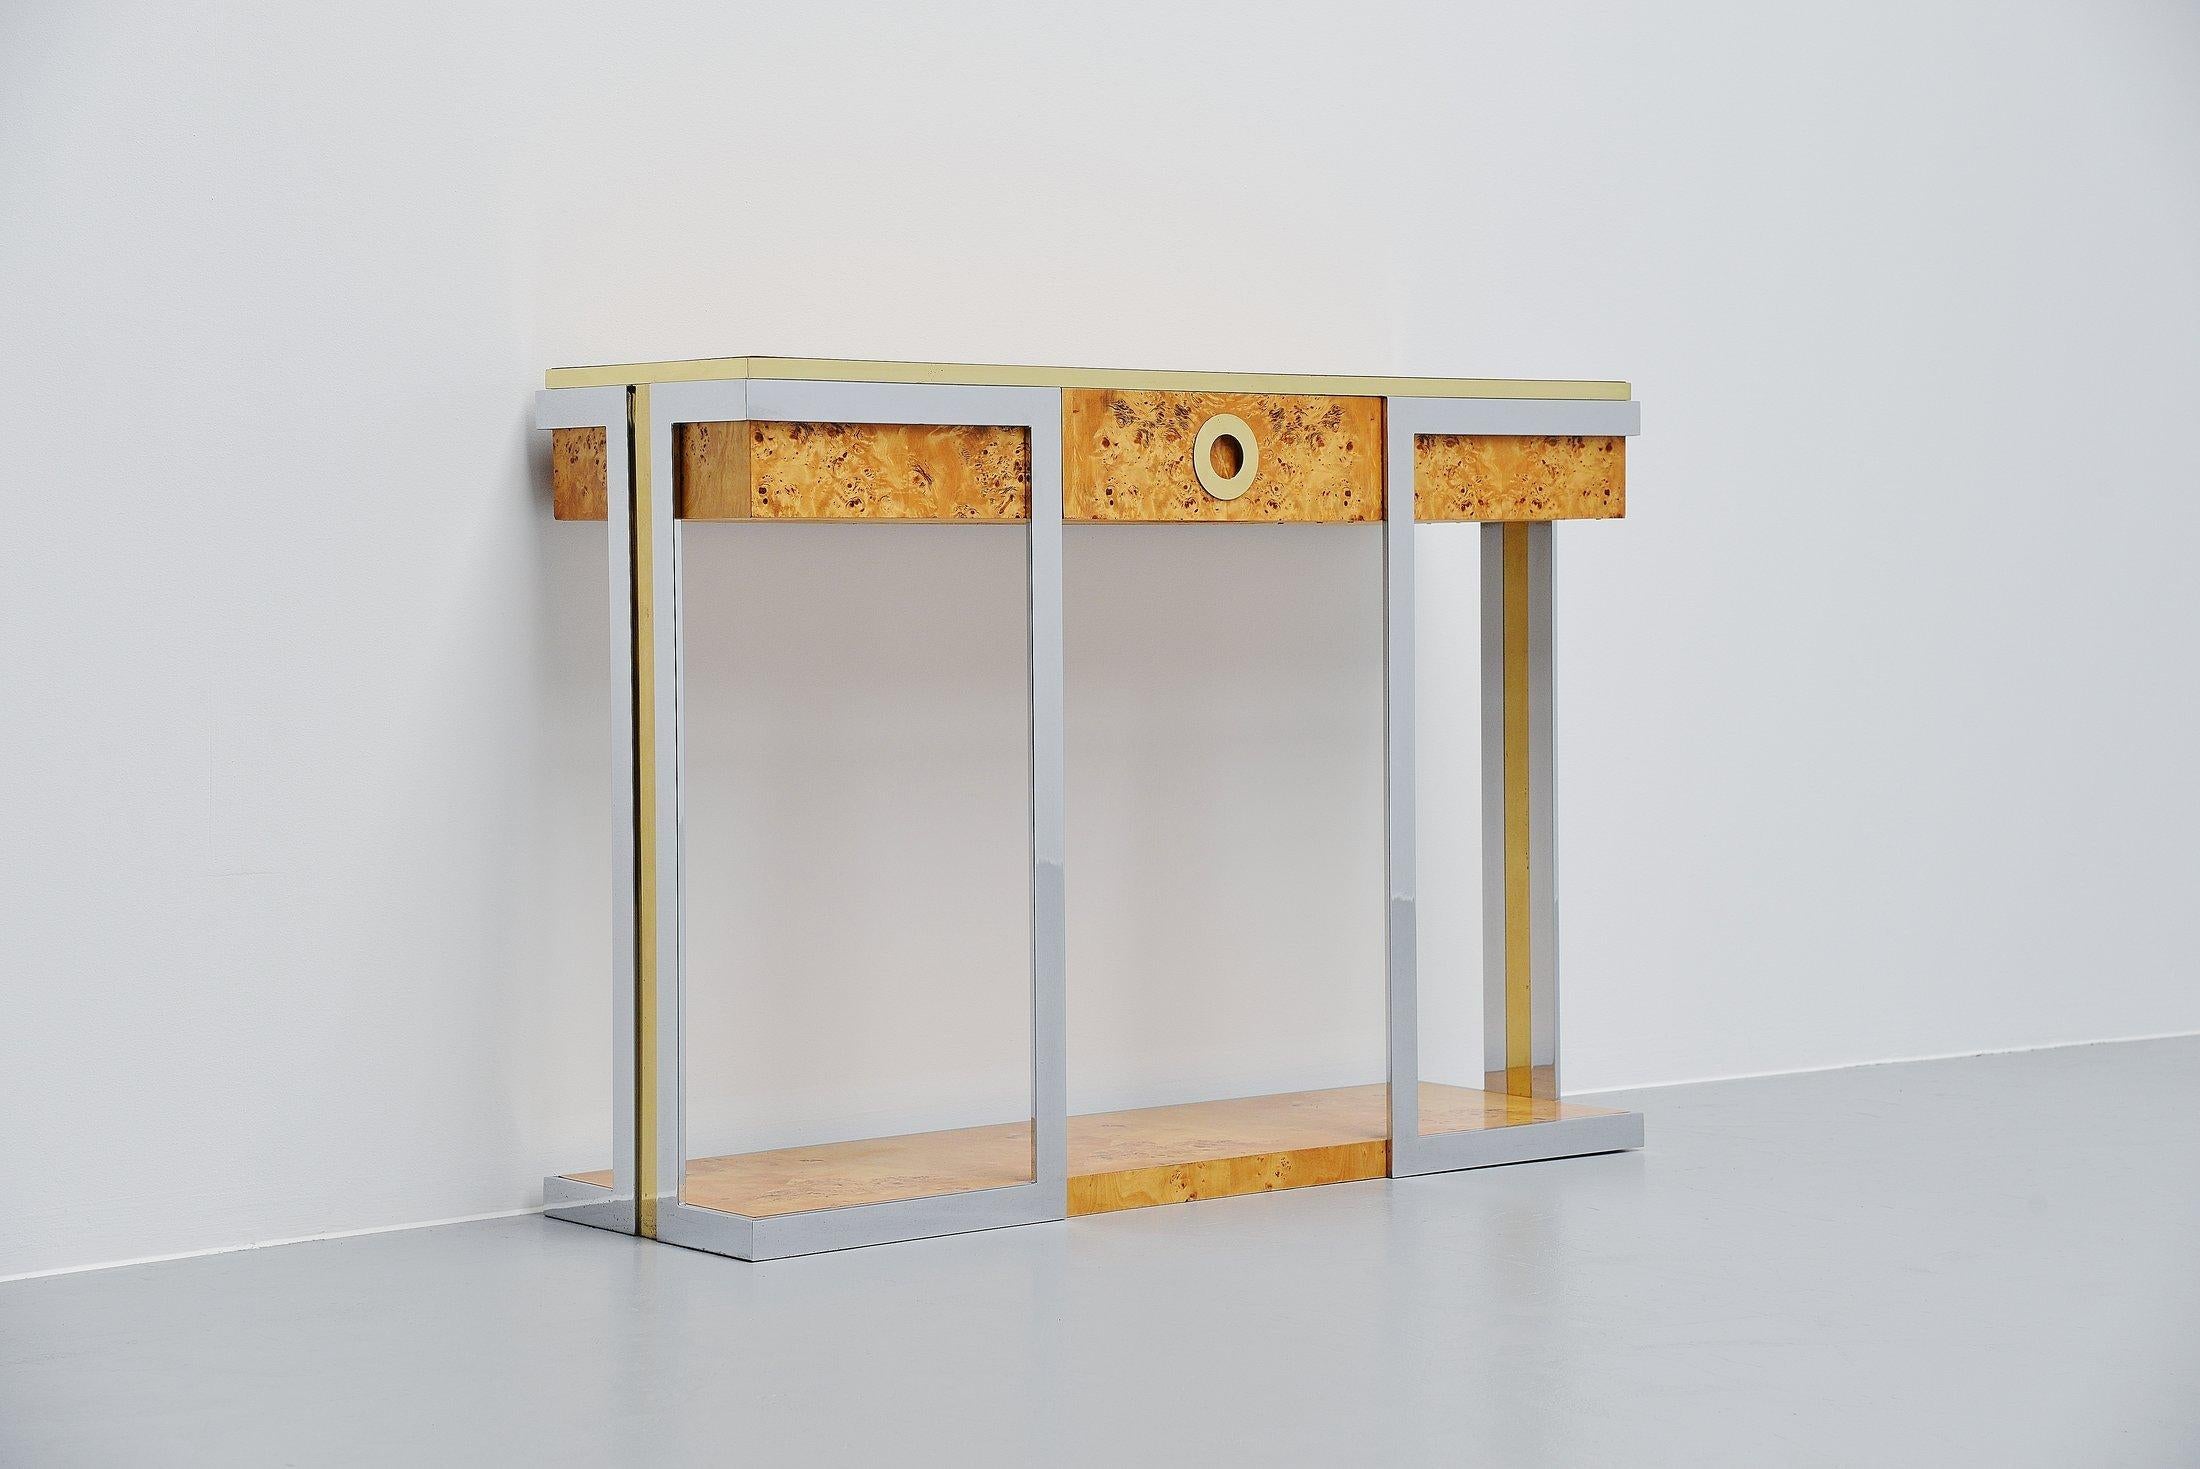 Very nice Hollywood Regency style console table designed by Willy Rizzo and manufactured by Mario Sabot, Italy 1970. The console is made of burl wood veneer and has brass and chrome details. It has a drawer in the middle, for small storage space.